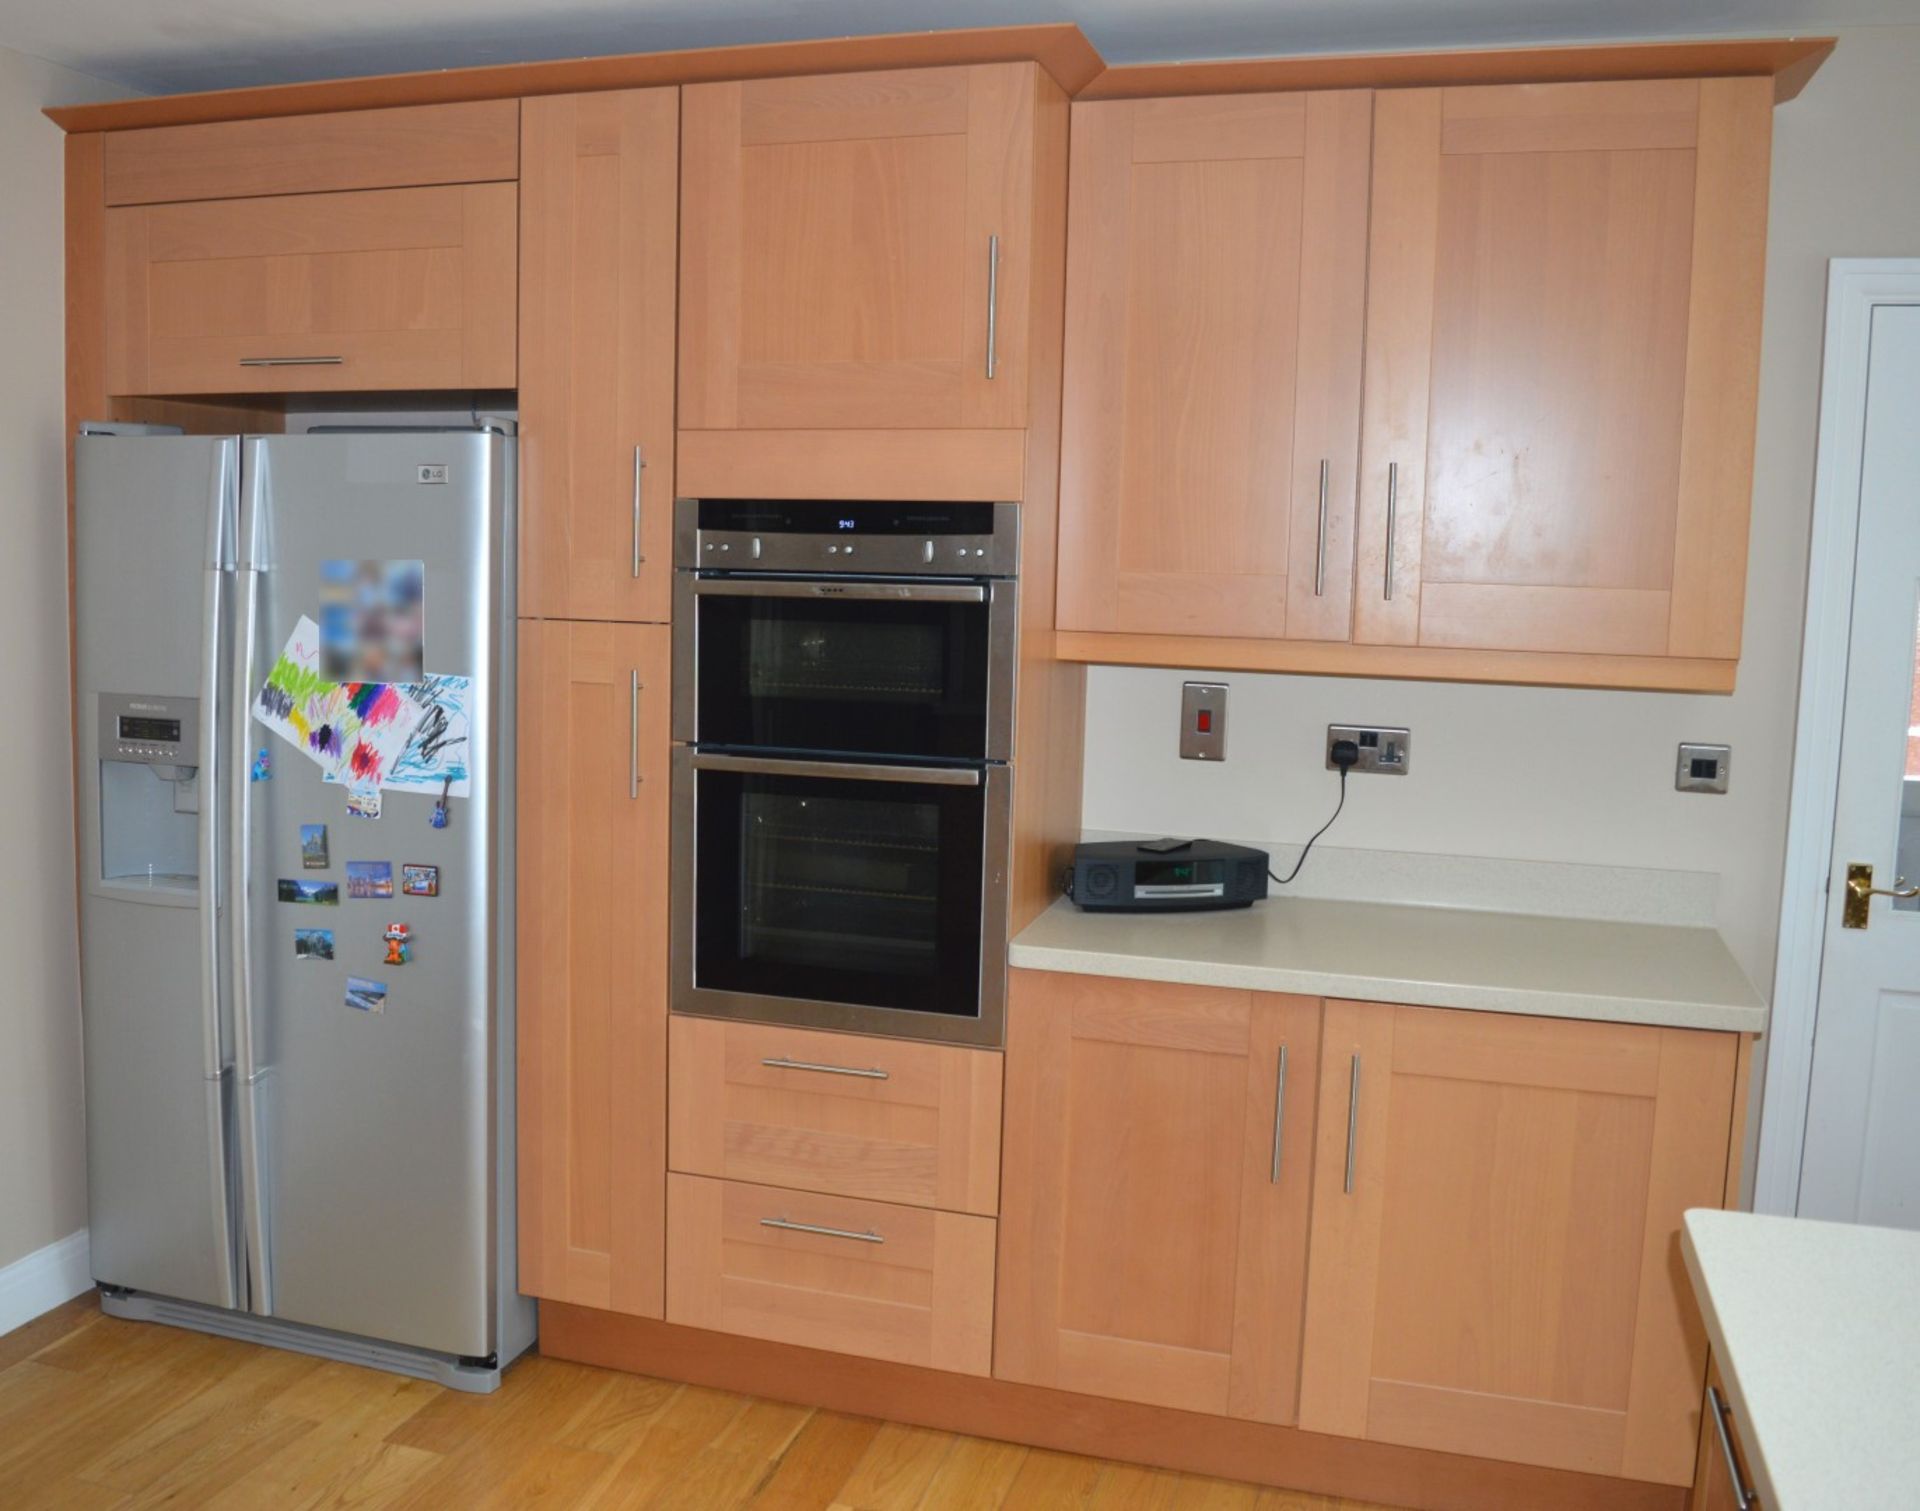 1 x Bespoke Maelstrom Solid Wood Fitted Kitchen With Corian Tops - In Excellent Condition - Neff - Image 9 of 65